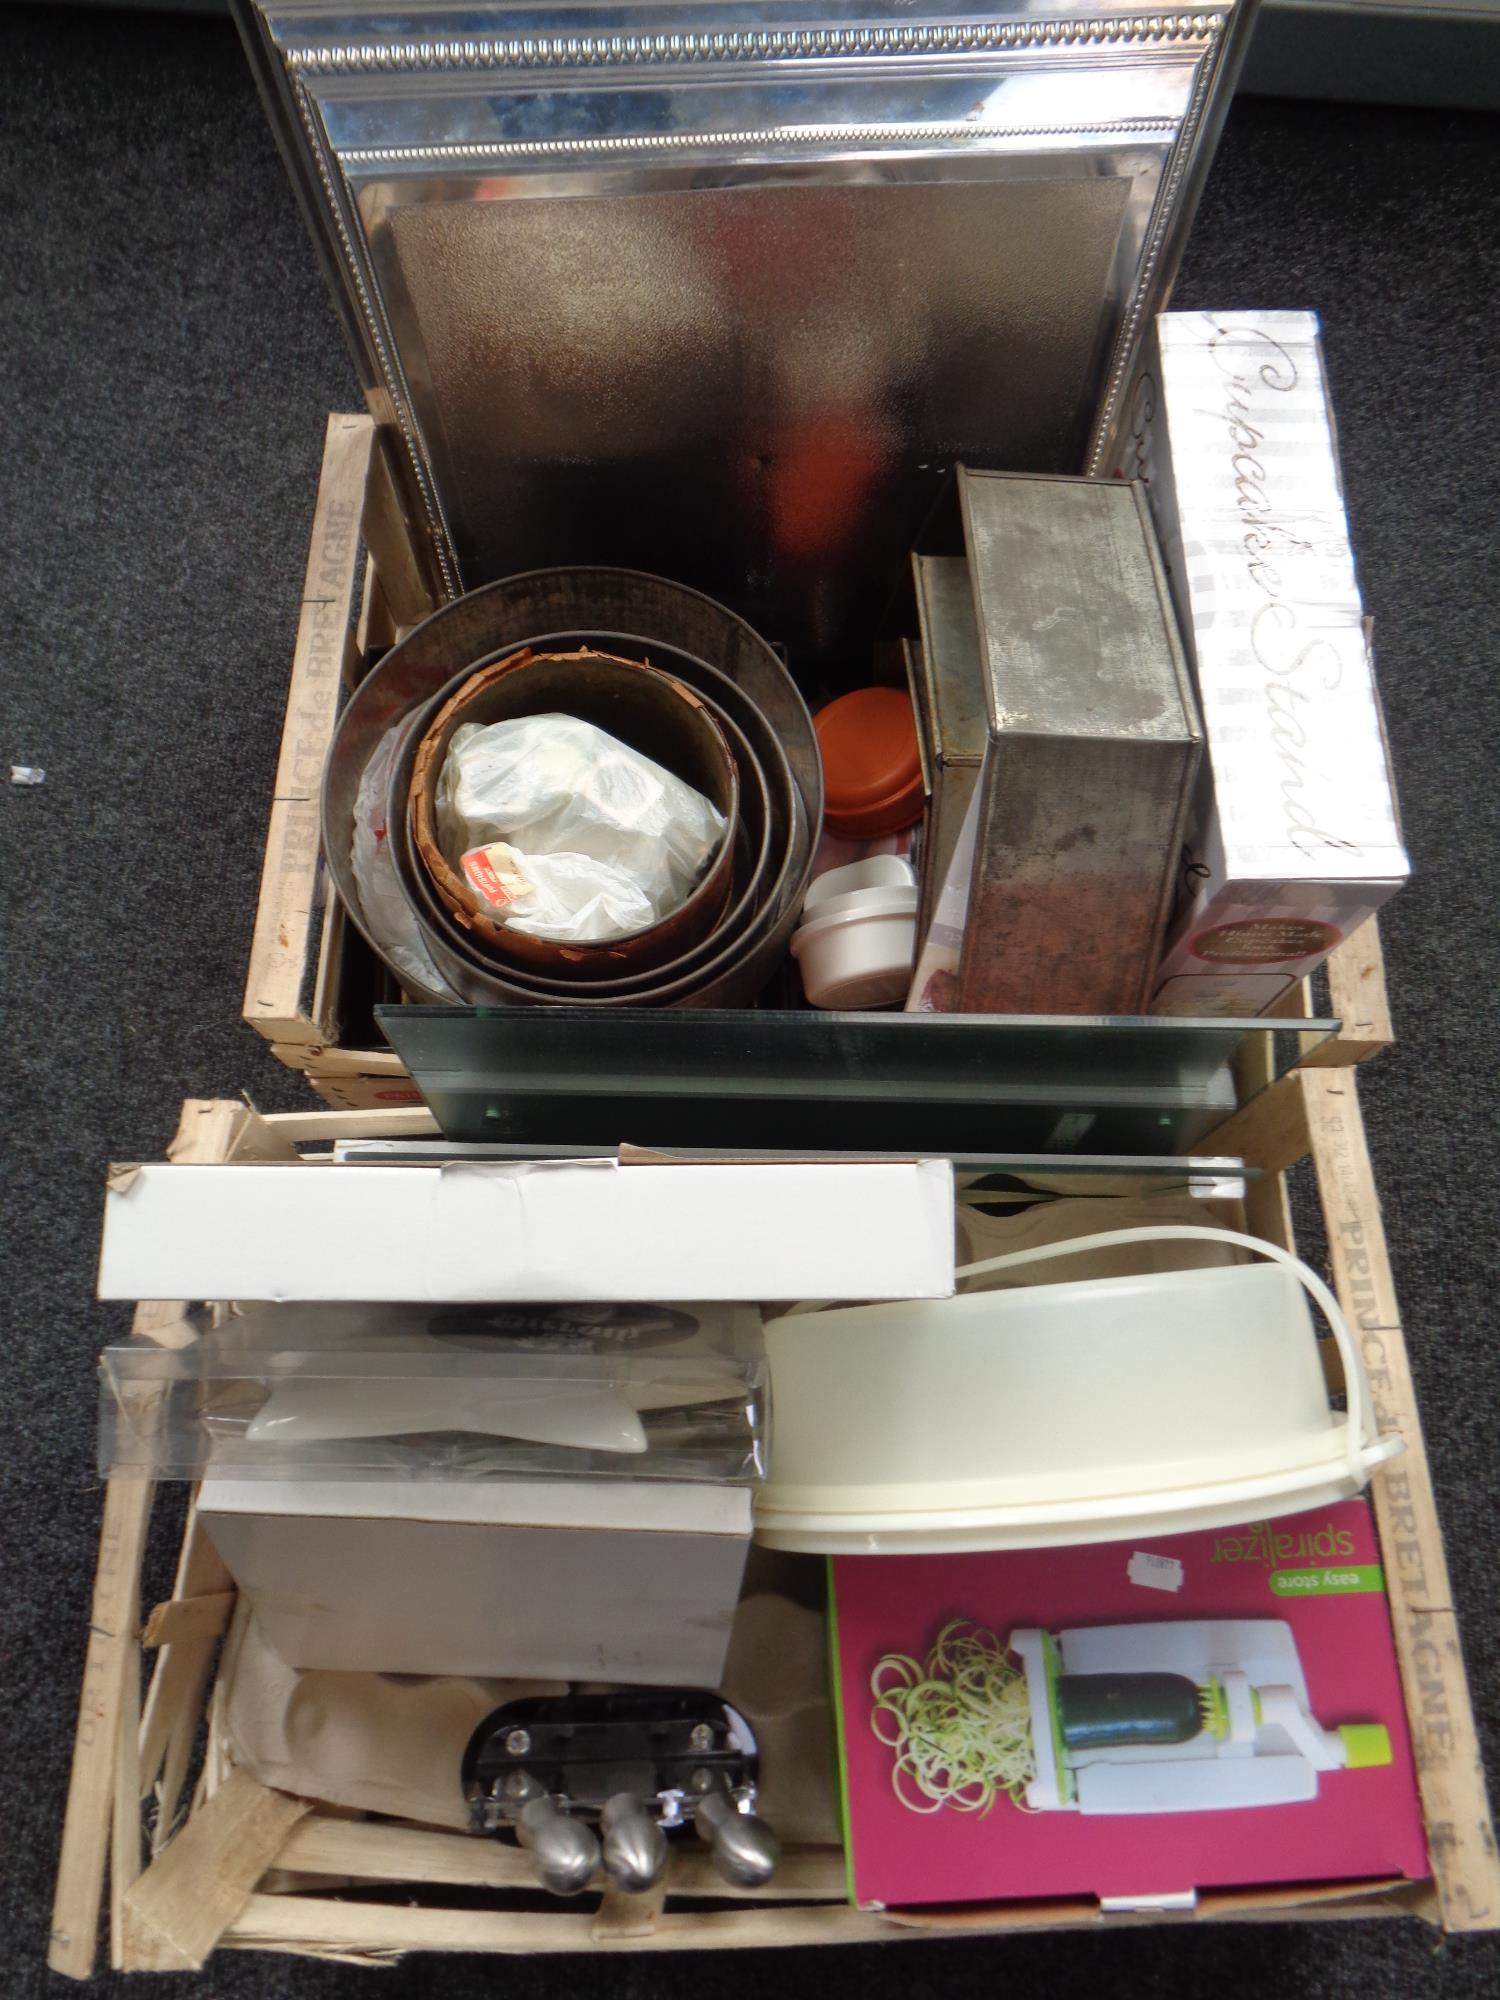 Two boxes of wedding cake stand, kitchen wares,